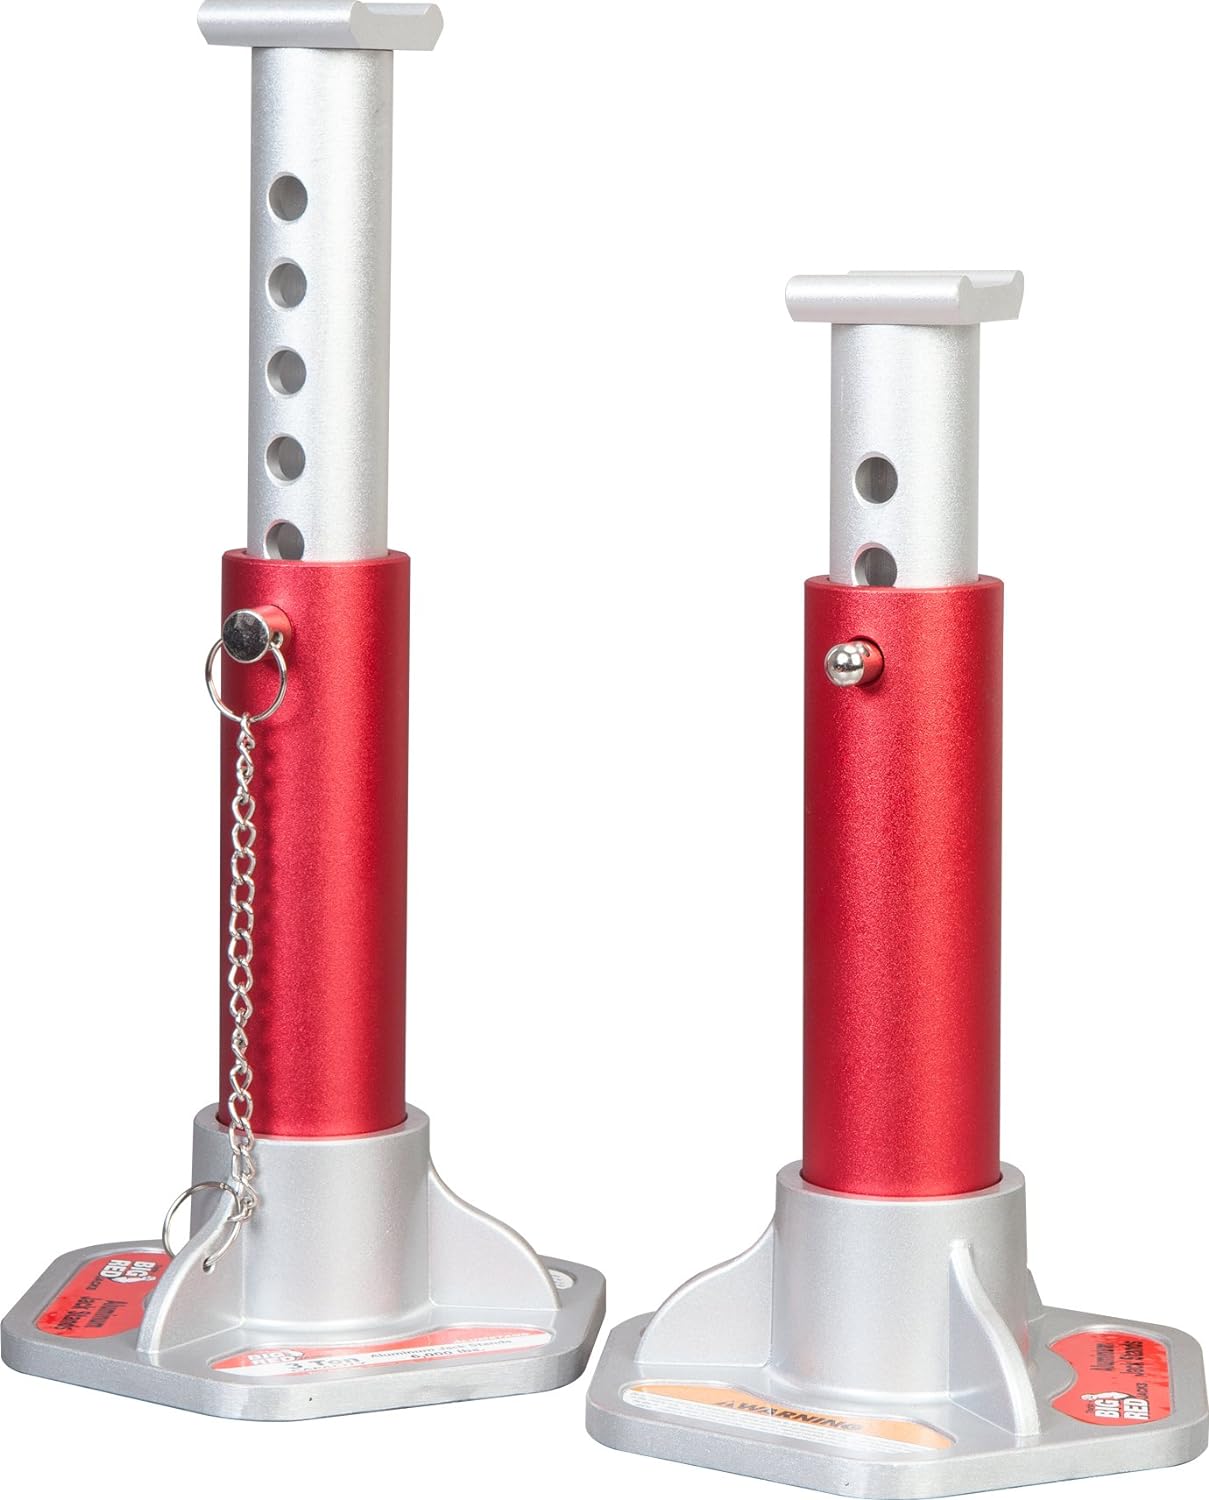 Big Red T43004 Torin Aluminum Jack Stands with Locking Support Pins: 3 Ton (6,000 lb) Capacity, Red/Silver, 1 Pair